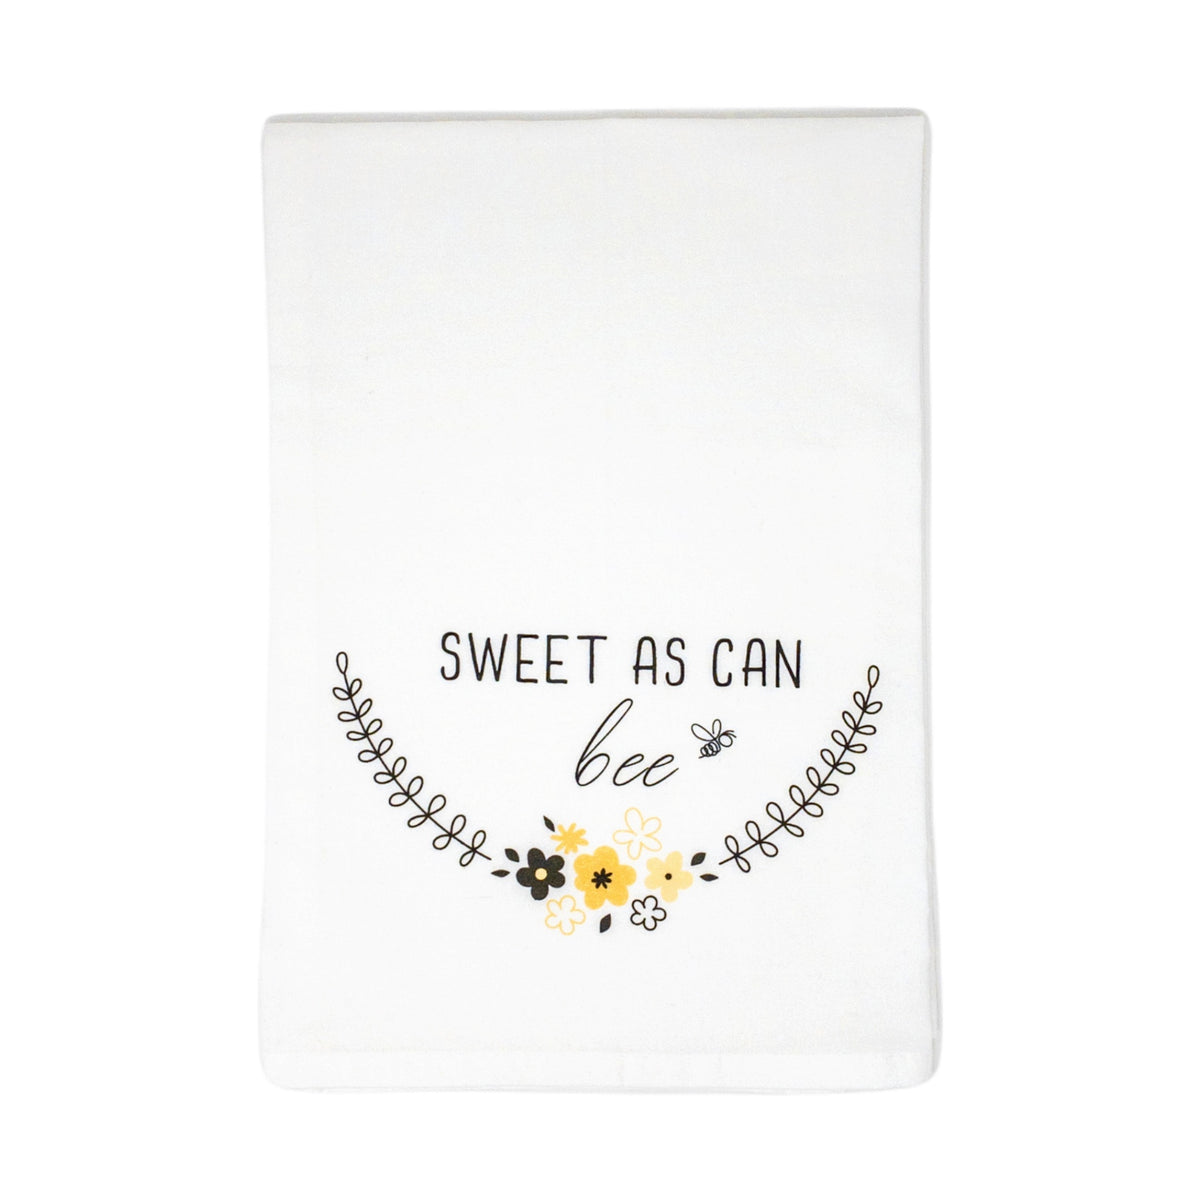 TOWEL FLOURSACK SWEET AS CAN BEE COTTON